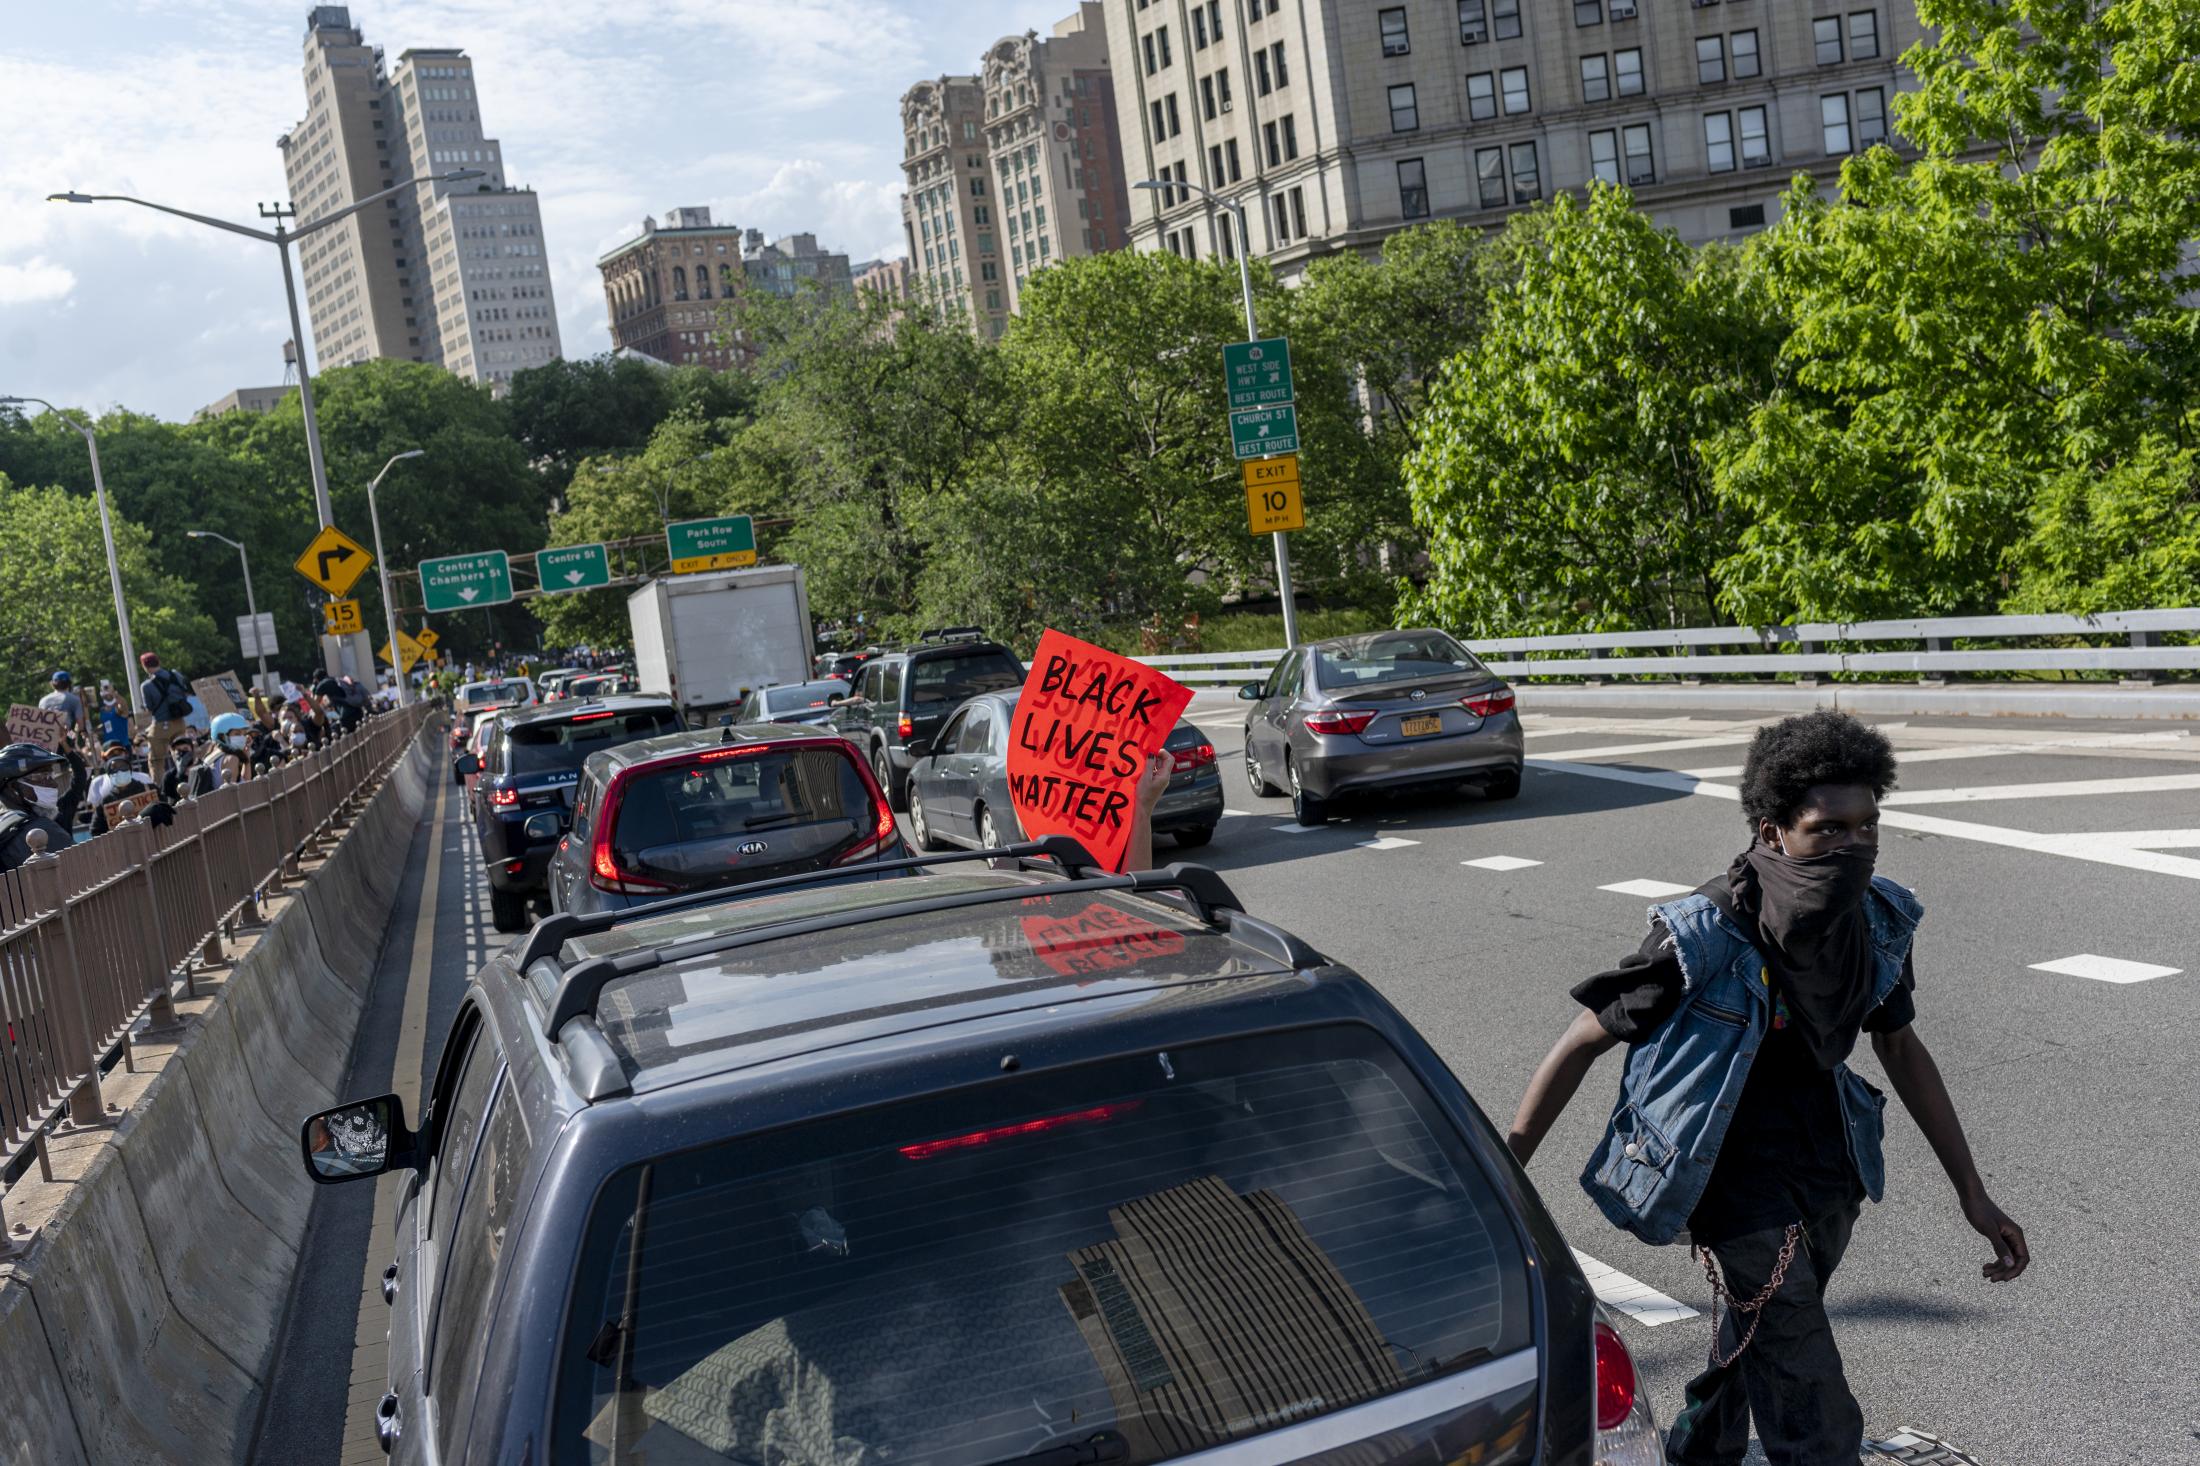 BLM Protests in NYC - A man blocks an exit on the Brooklyn Bridge eastern side,...